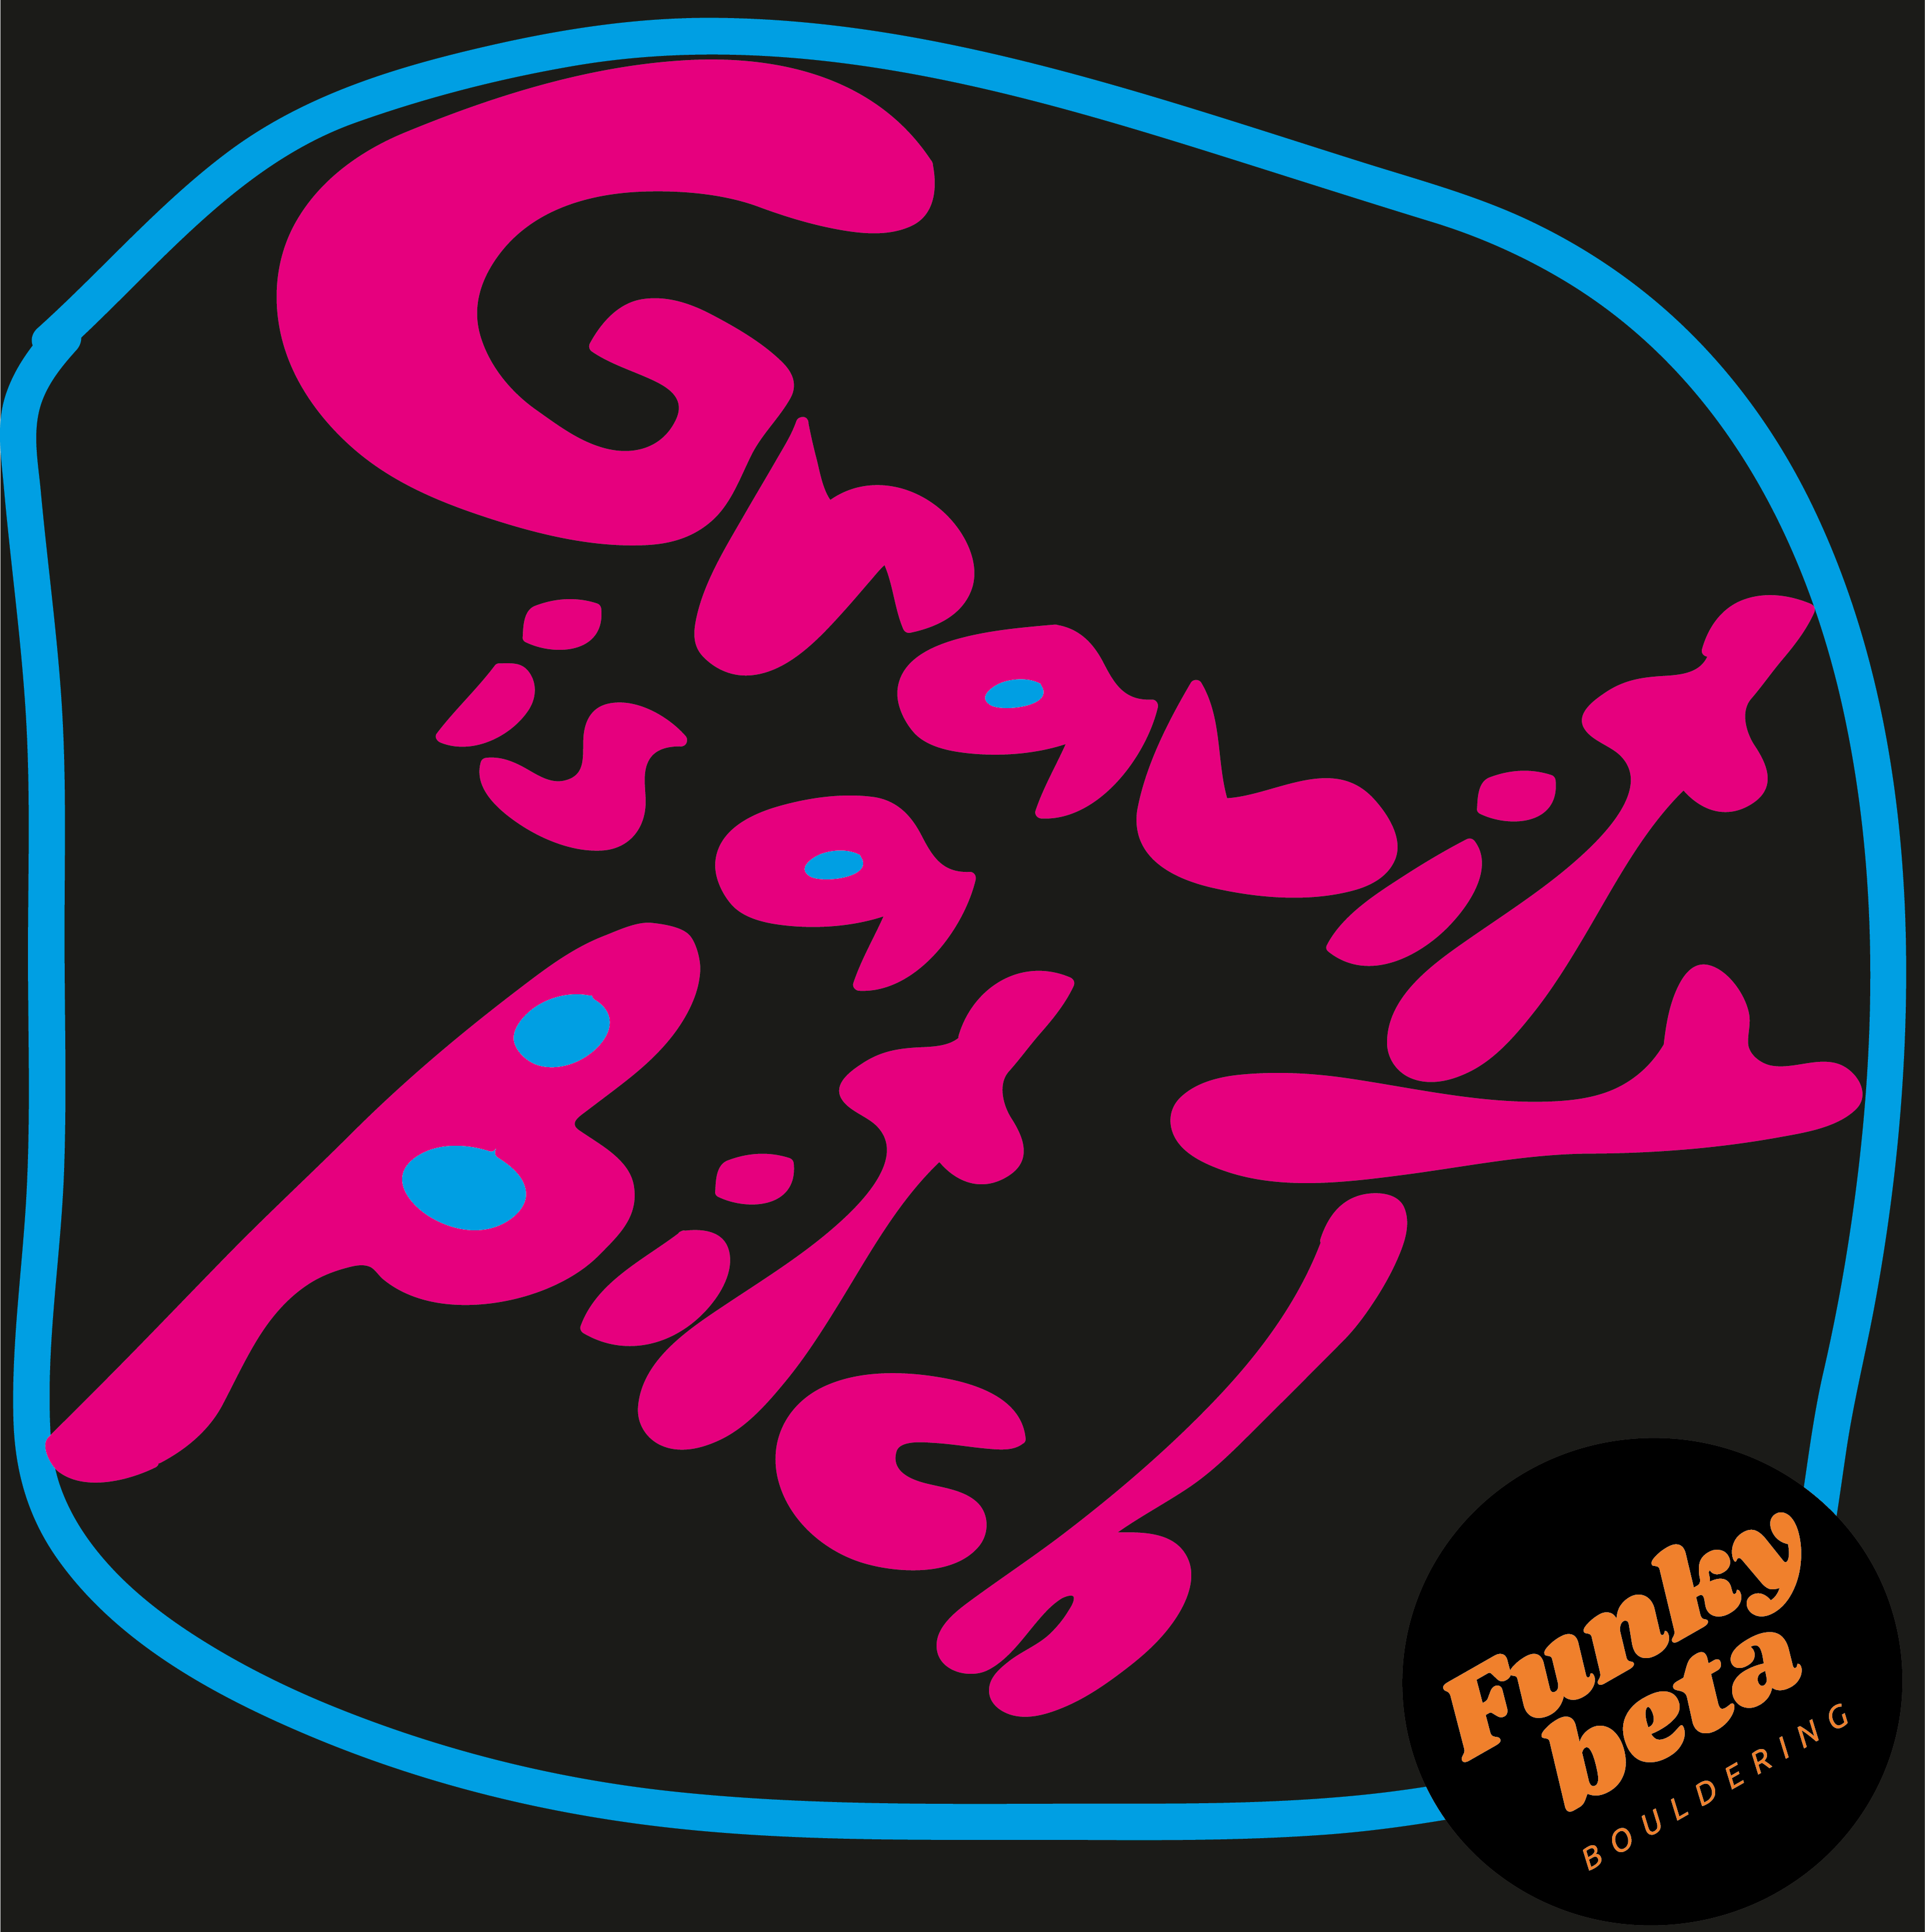 NEW! Gravity Is a B**** - Climbing T-shirt by Funkybeta Bouldering